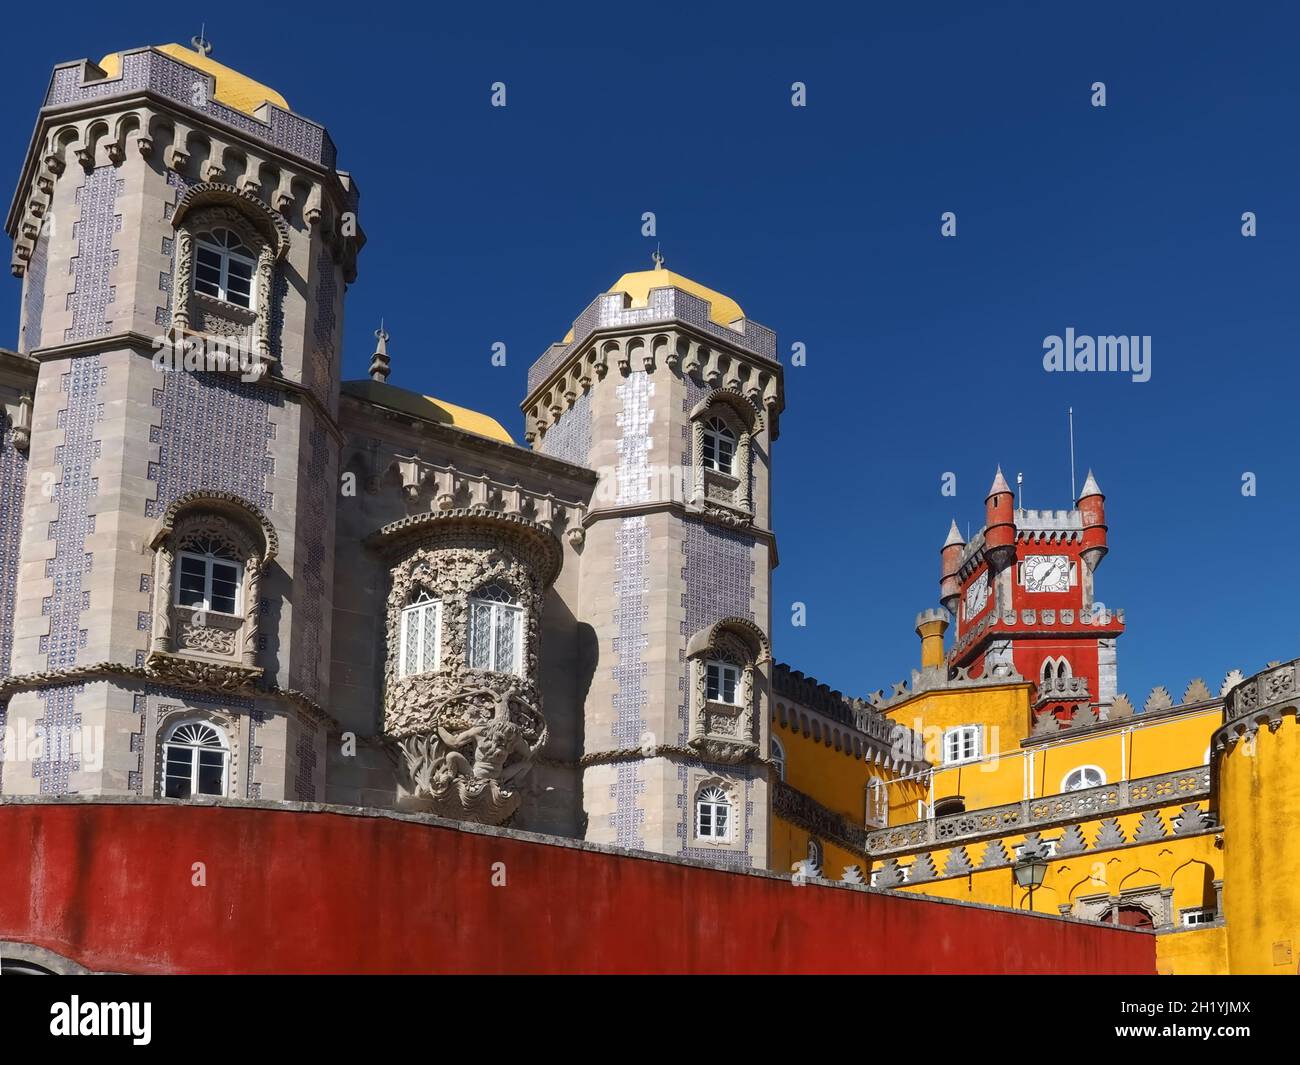 Colorful Pena palace in Sintra in Portugal Stock Photo